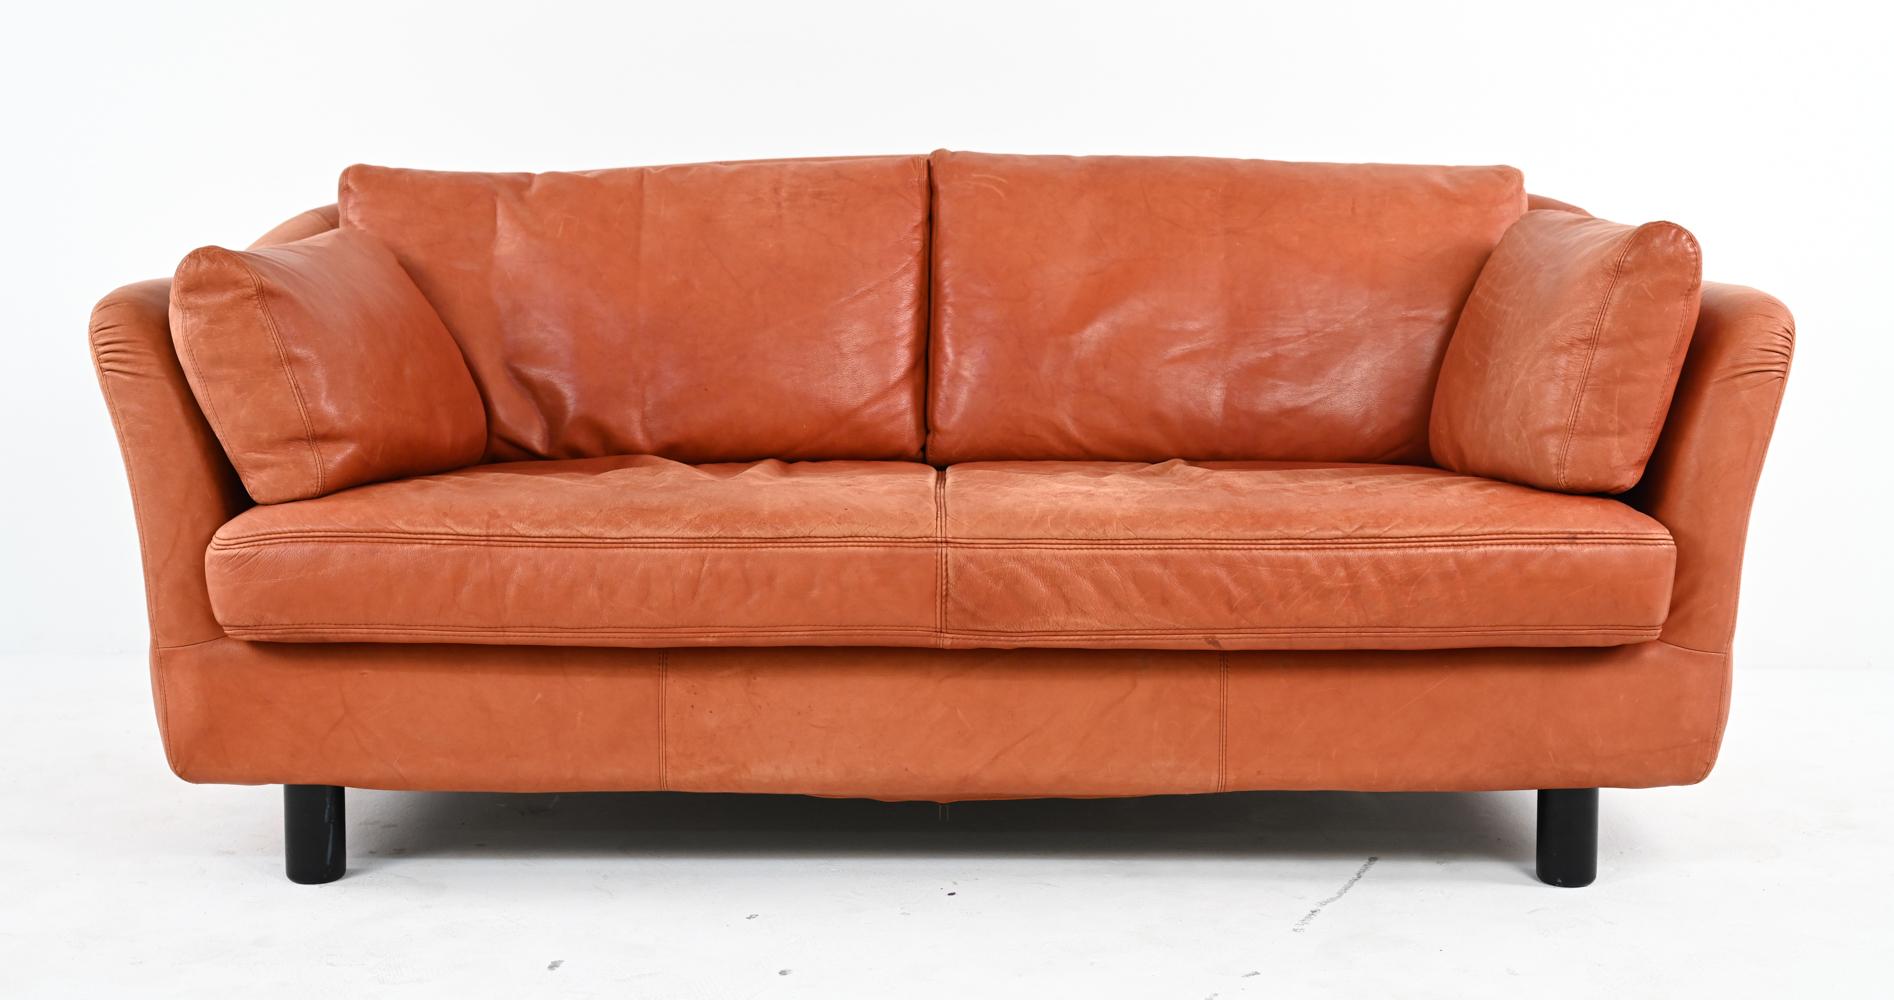 Pair of Swedish Modern Leather Sofas by Dux, c. 1970's 9